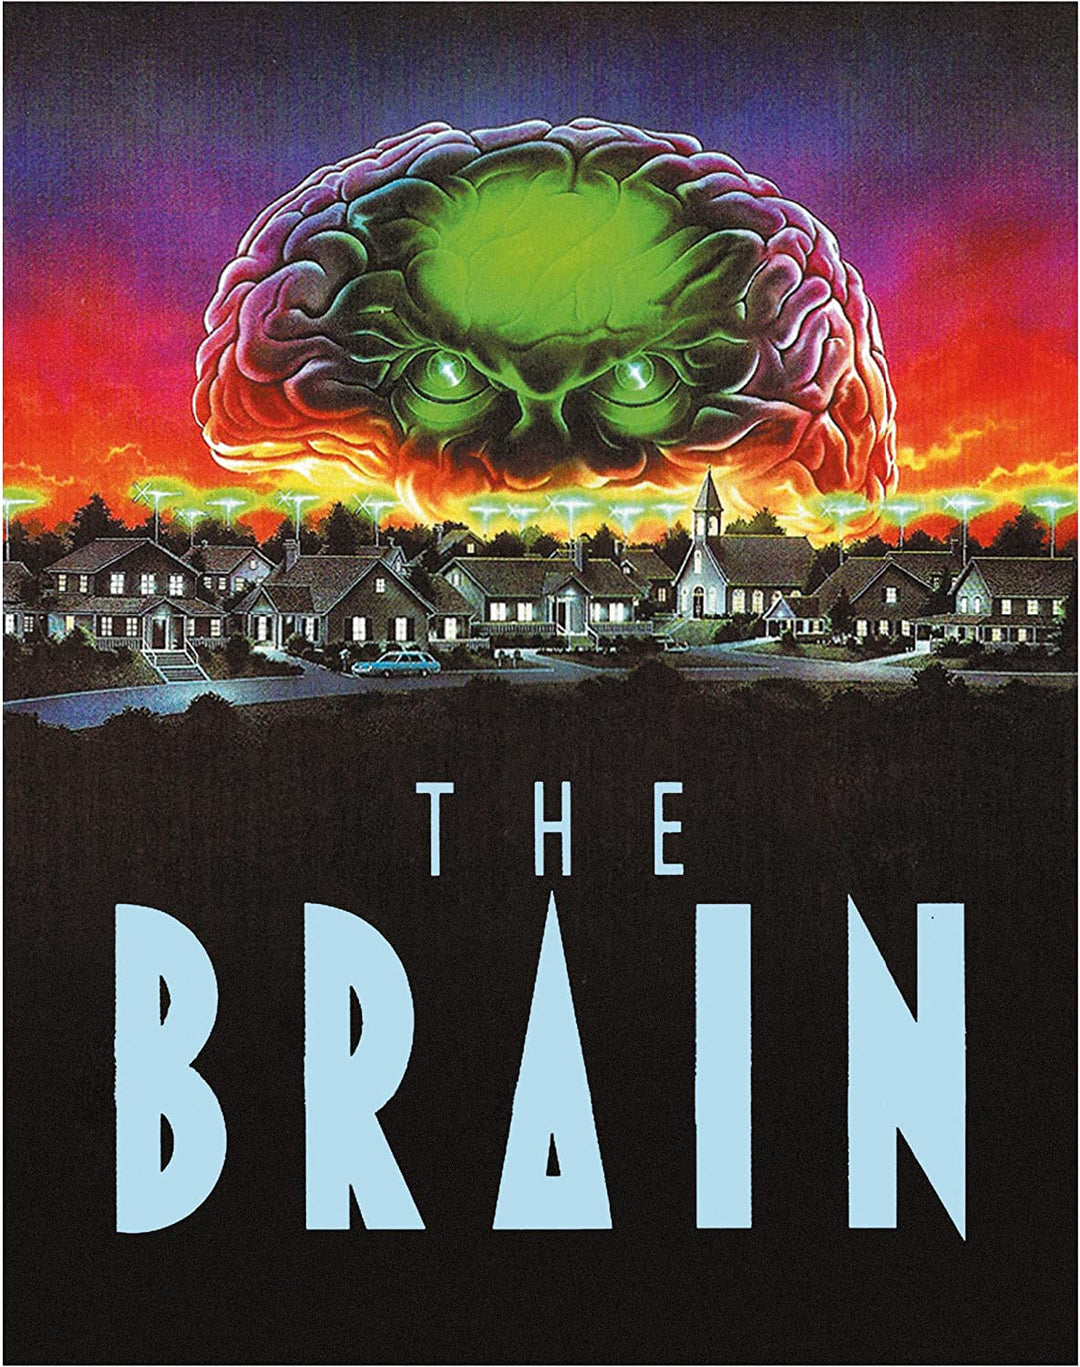 The Brain (Limited Edition) [Blu-ray]